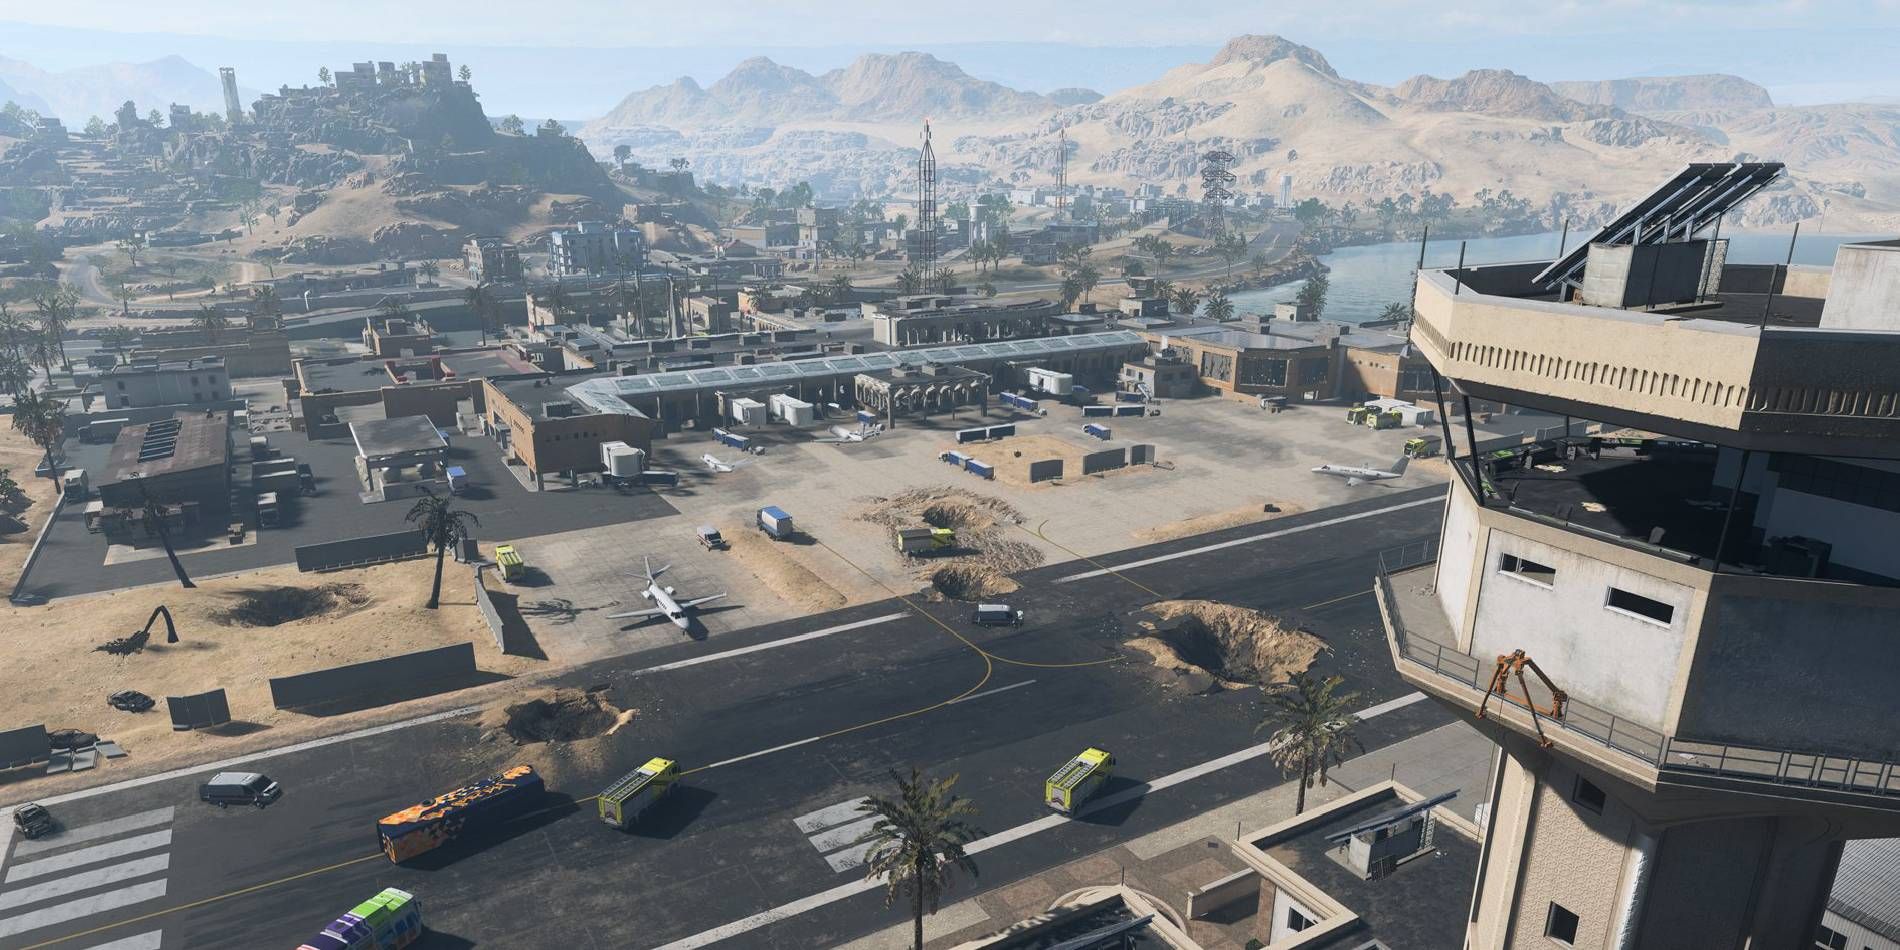 Call of Duty Warzone 2 Al Mazrah Airport Location on Map where Players can Find many Items like Heavy Chopper Fuel in DMZ Mode